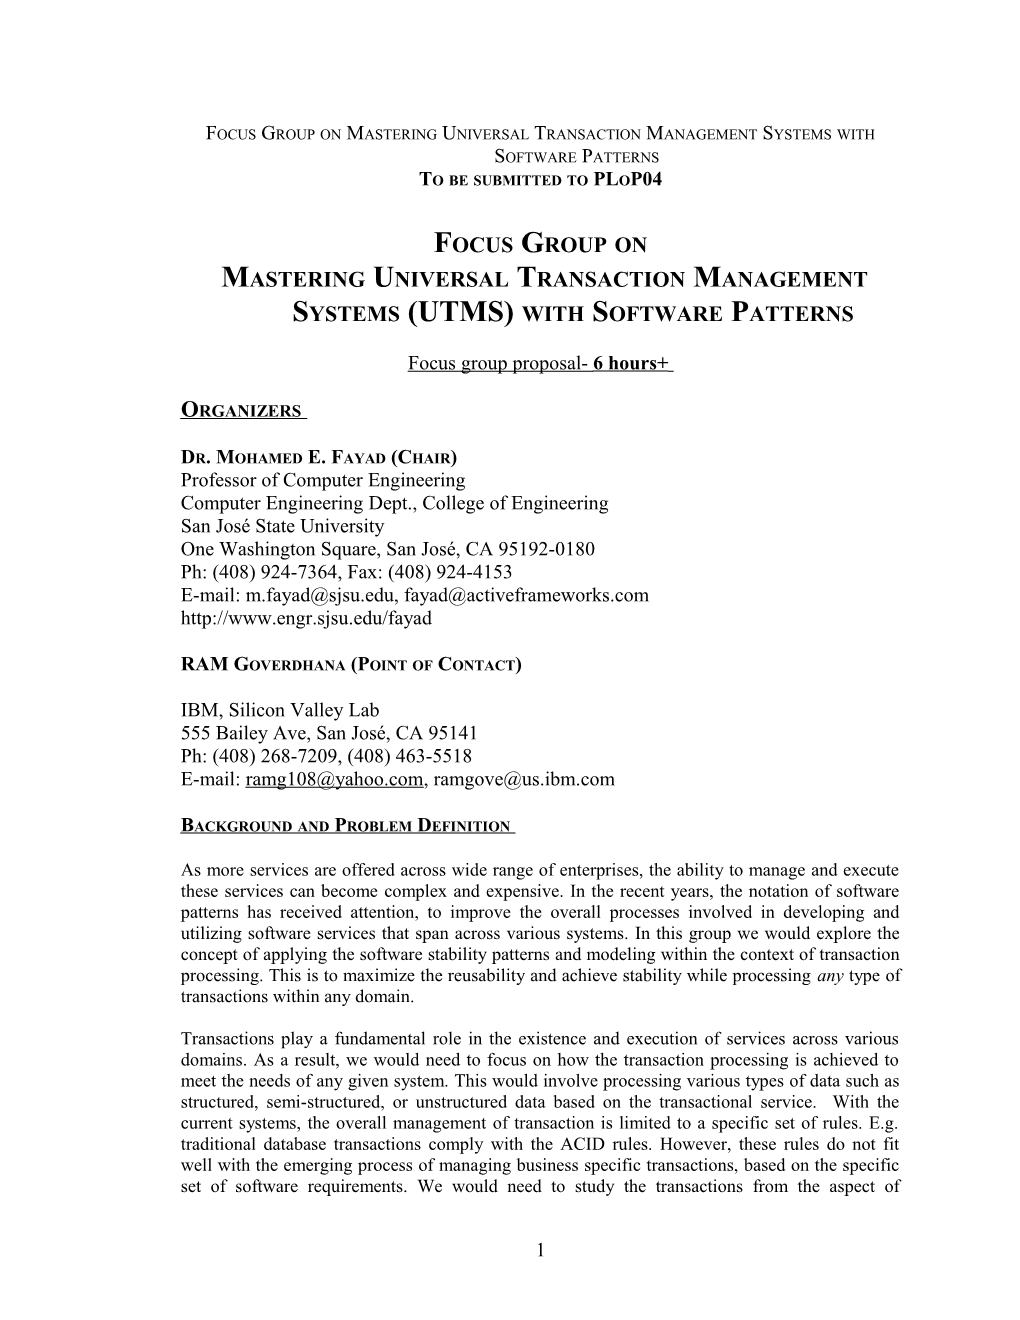 Mastering Universal Transaction Management Systems (Utms) with Software Patterns